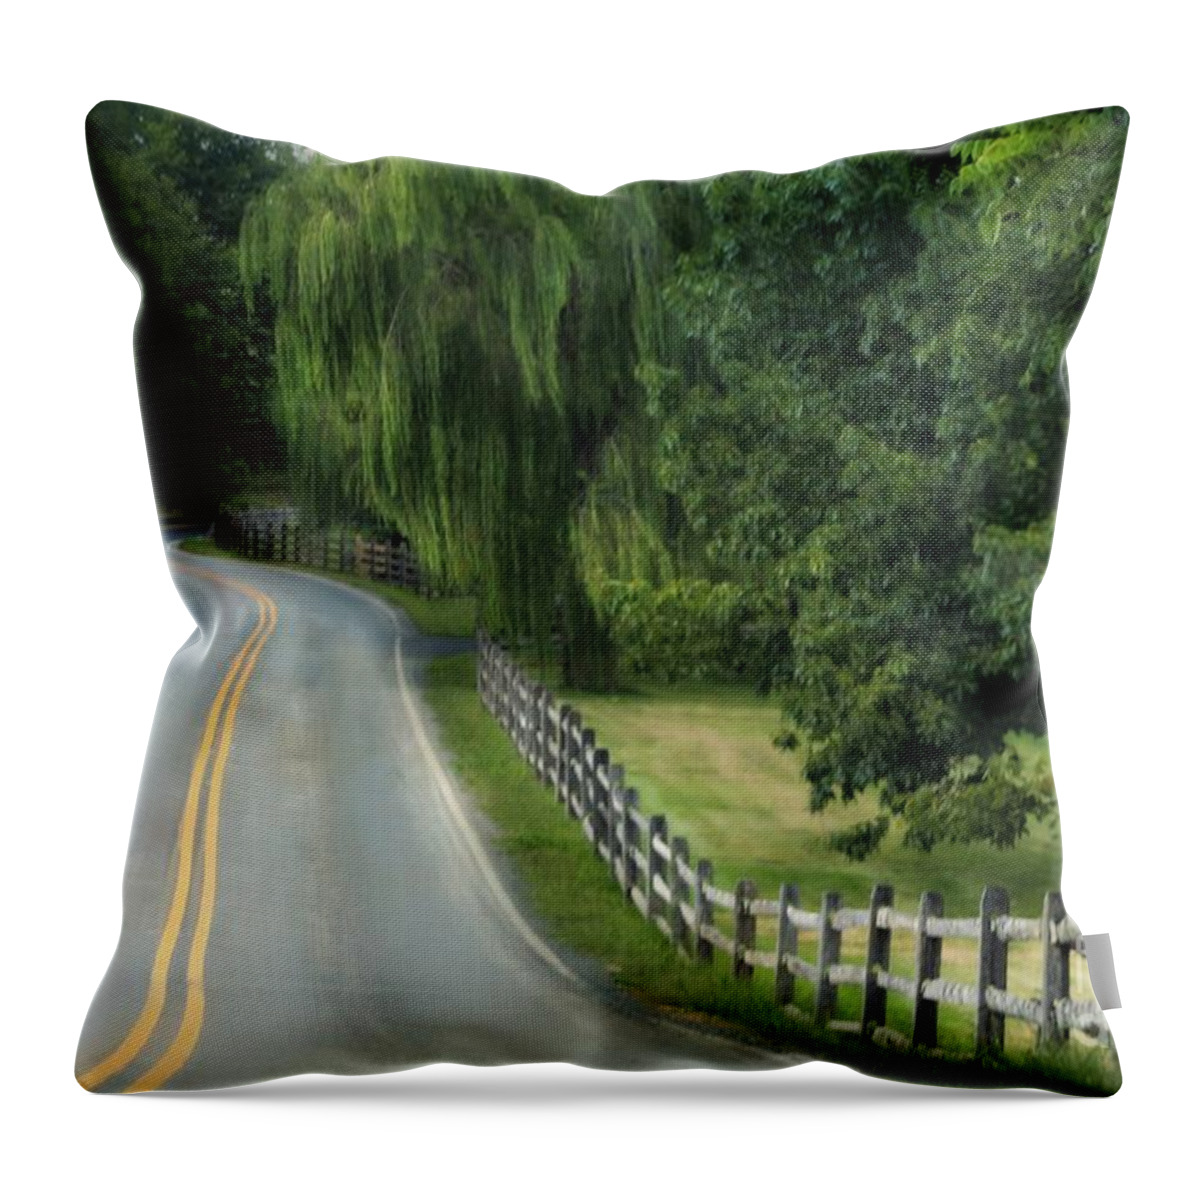 Country Road. Landscape Throw Pillow featuring the photograph Country Road by Beth Ferris Sale